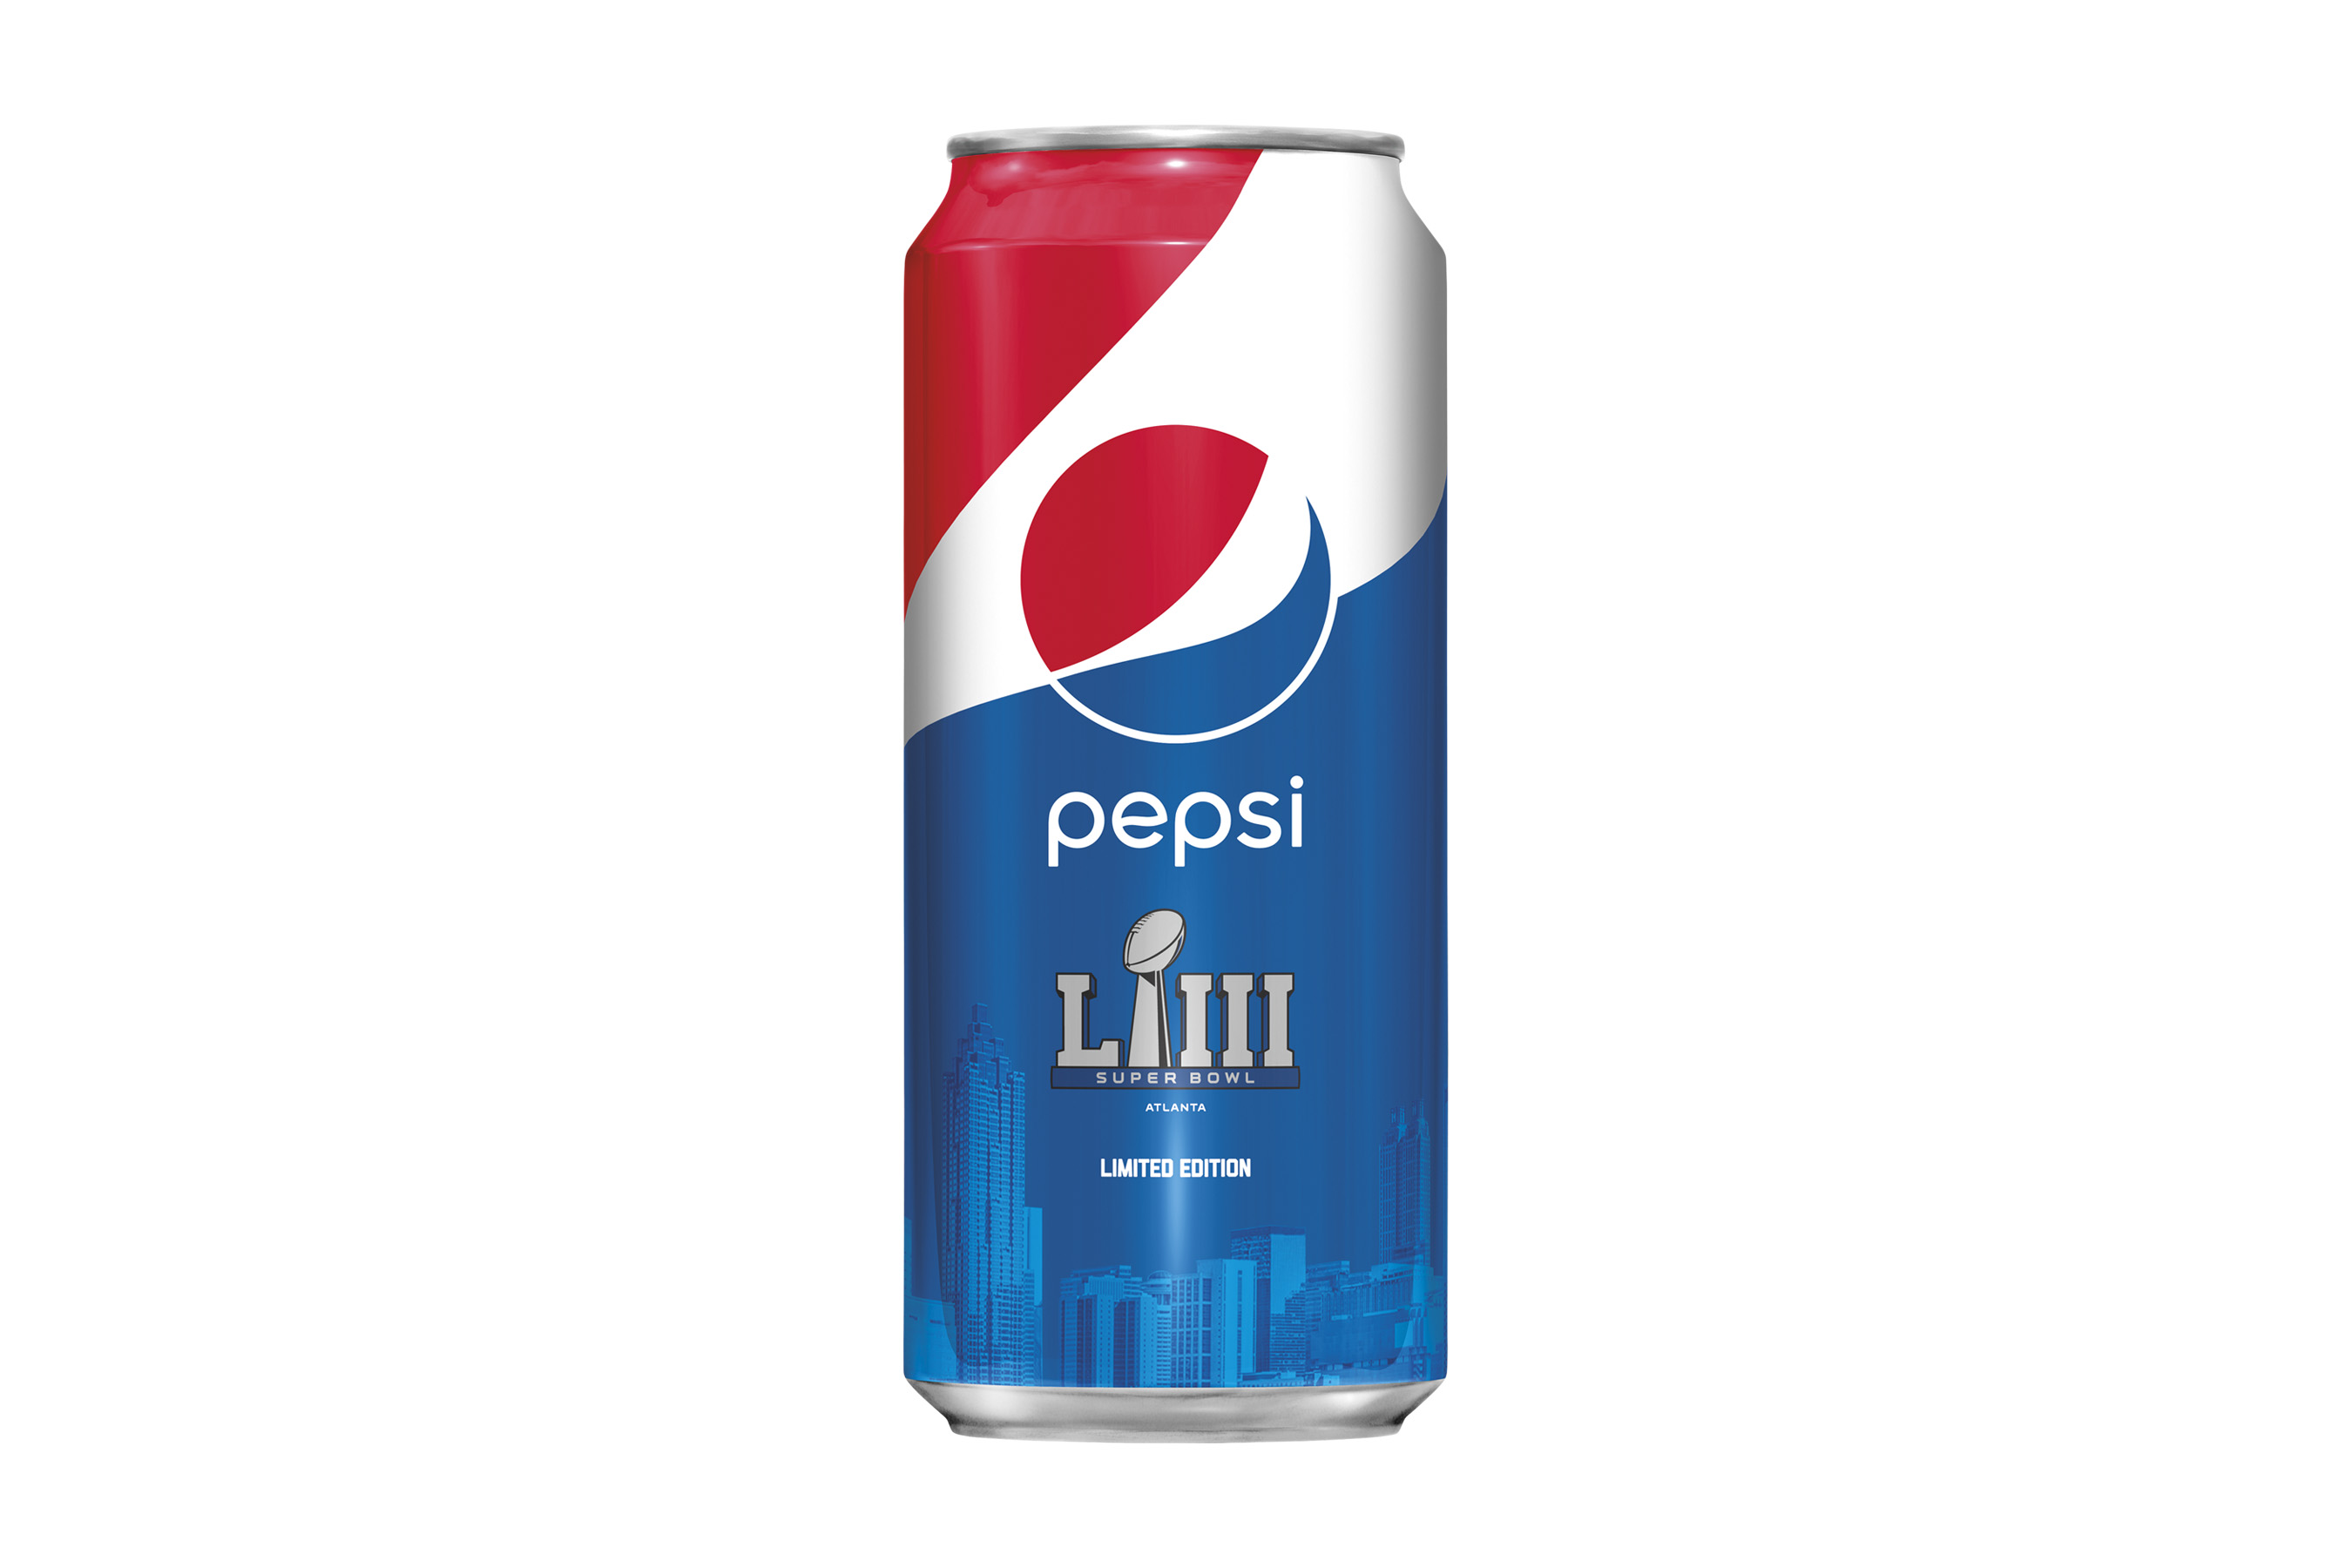 Limited-Edition Super Bowl LIII Packaging